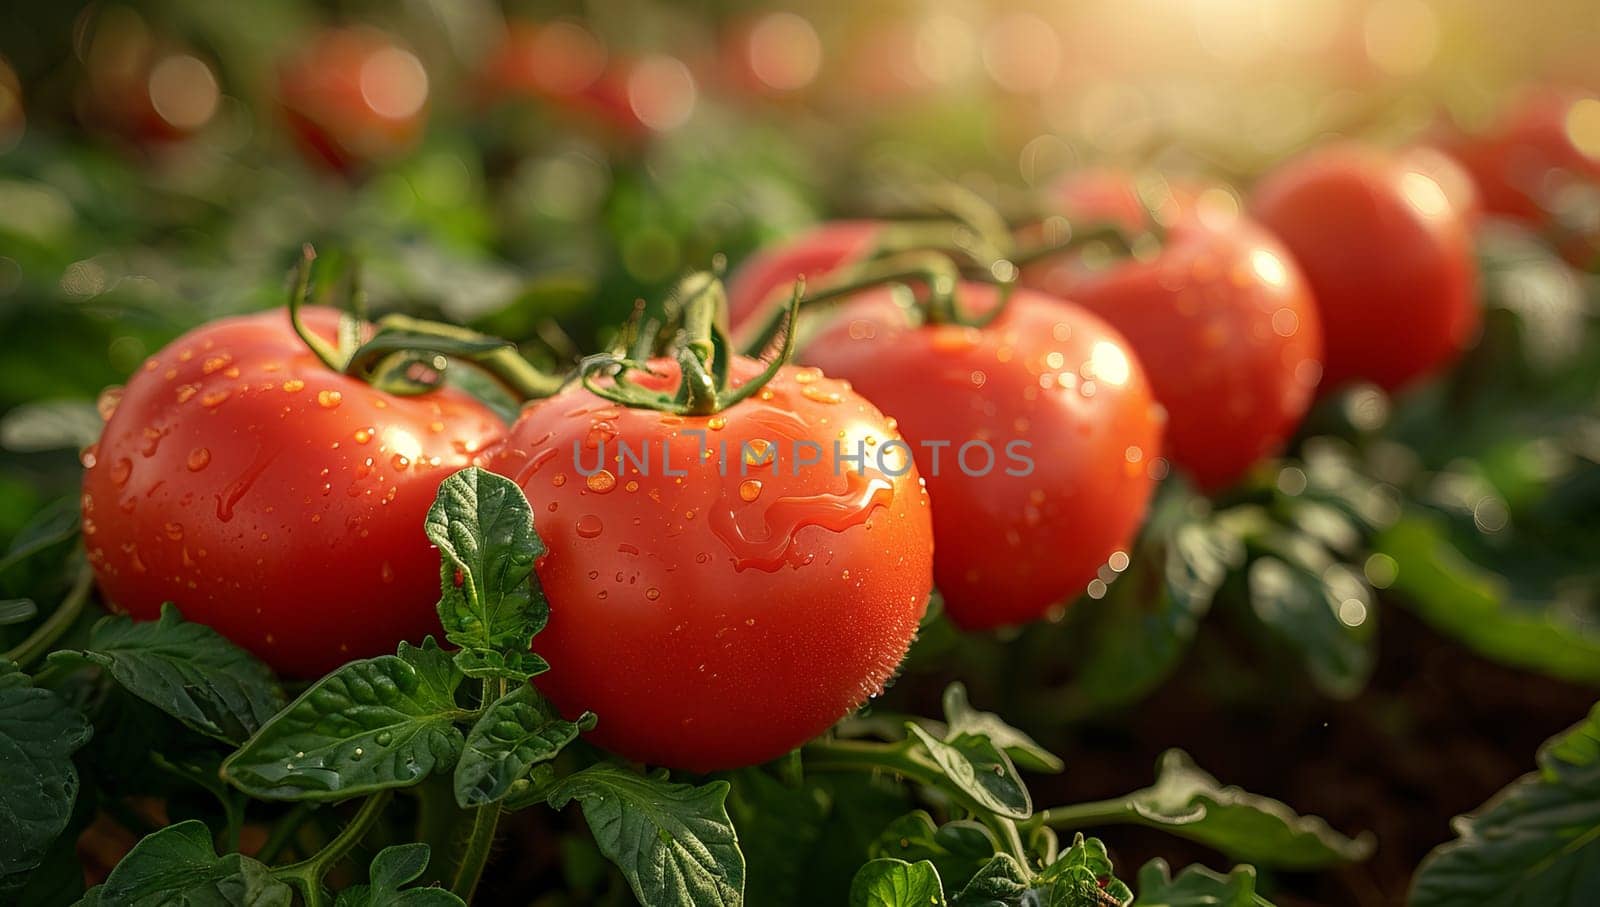 Ripe red tomatoes glisten with dew in the morning sun amidst lush green leaves.